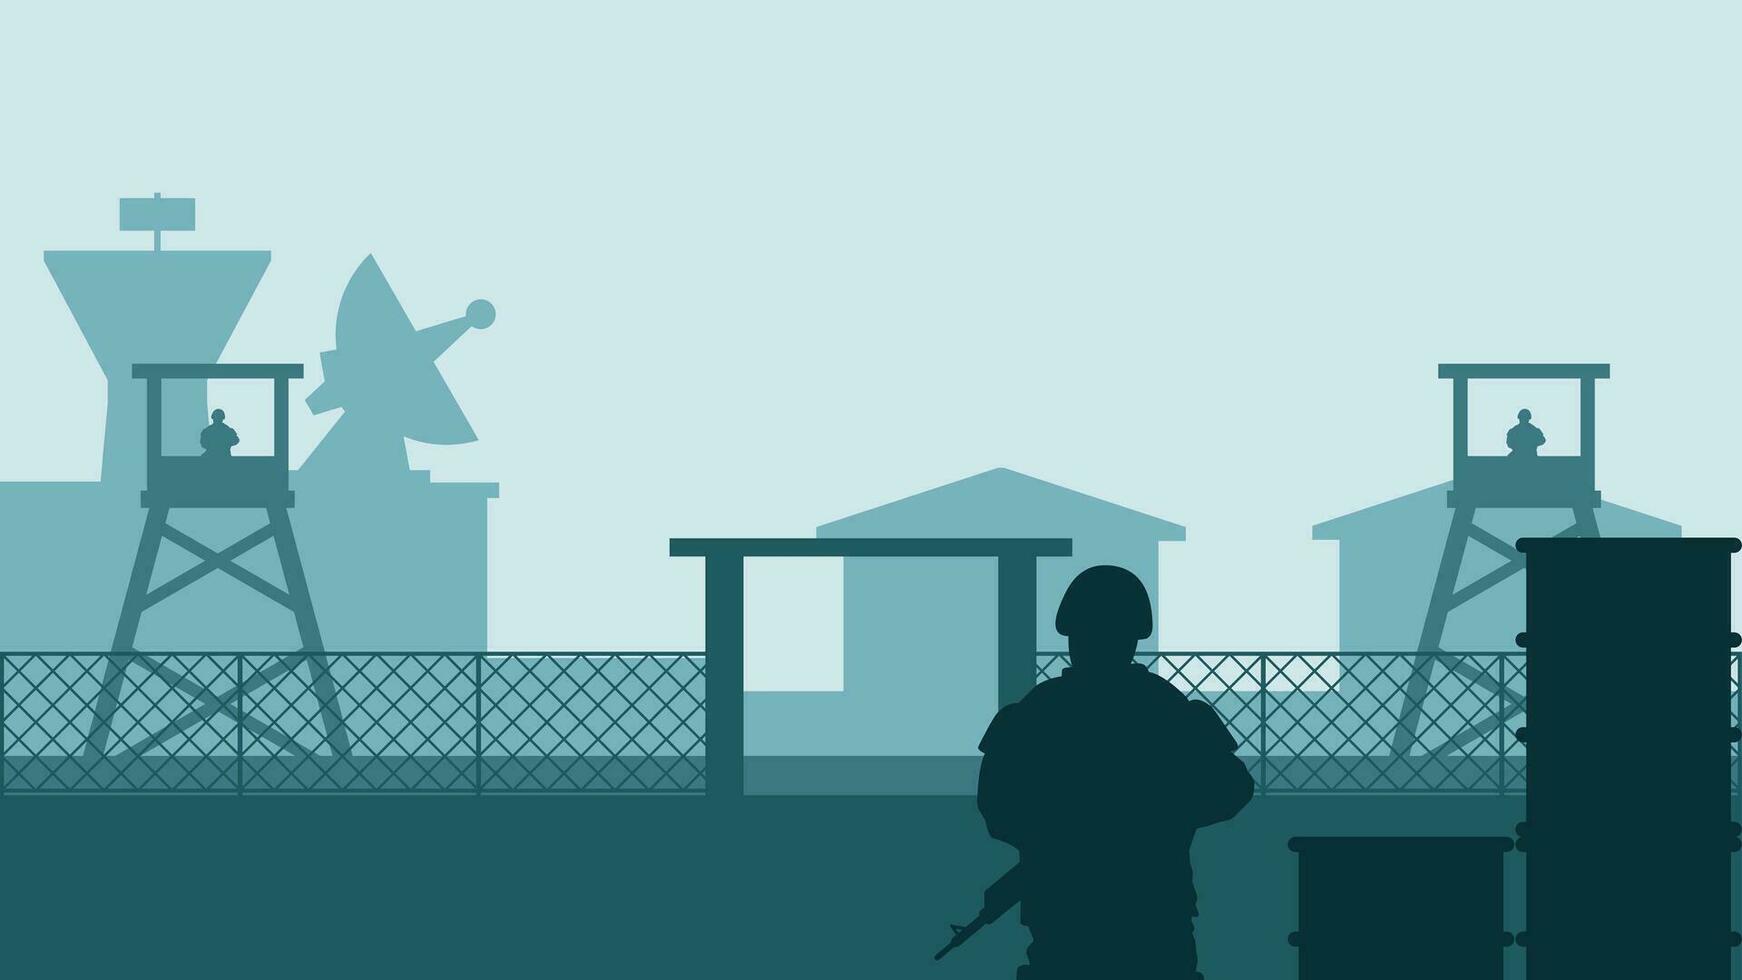 Military base landscape vector illustration. Silhouette of soldier at military base with watchtower and barracks. Military landscape for background, wallpaper or landing page